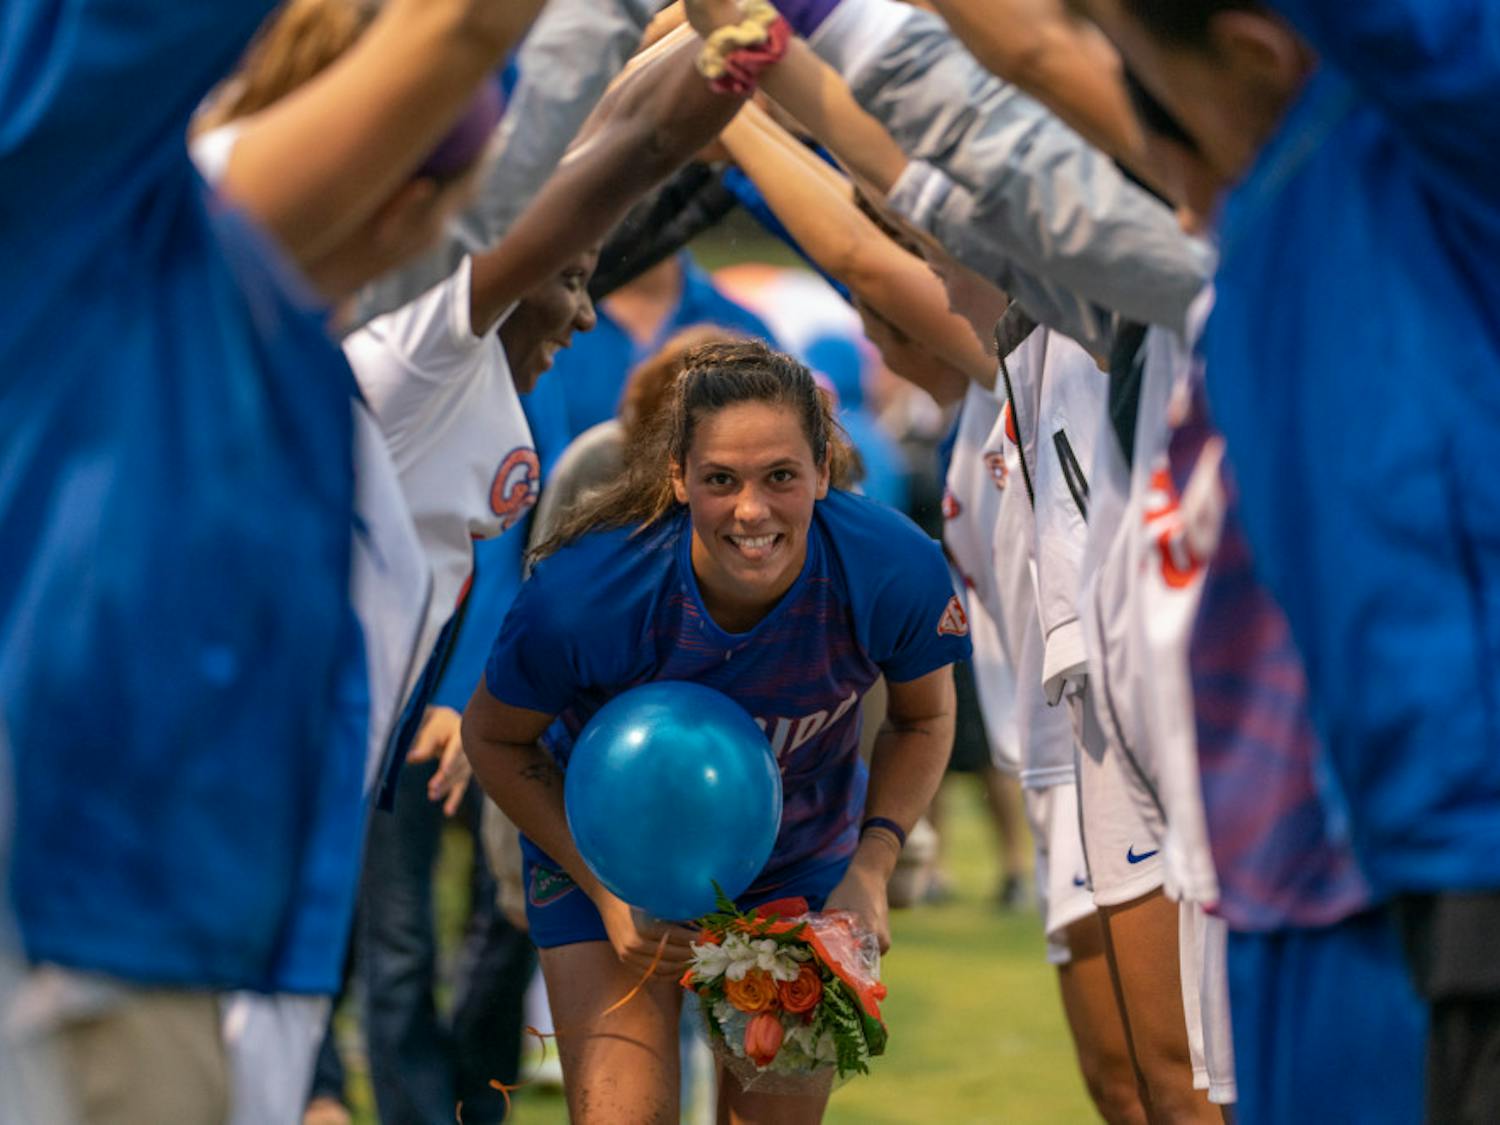 Goalkeeper Kaylan Marckese player her last season in Orange and Blue, leaving behind big shoes to fill along with the team's nine other graduating seniors. 